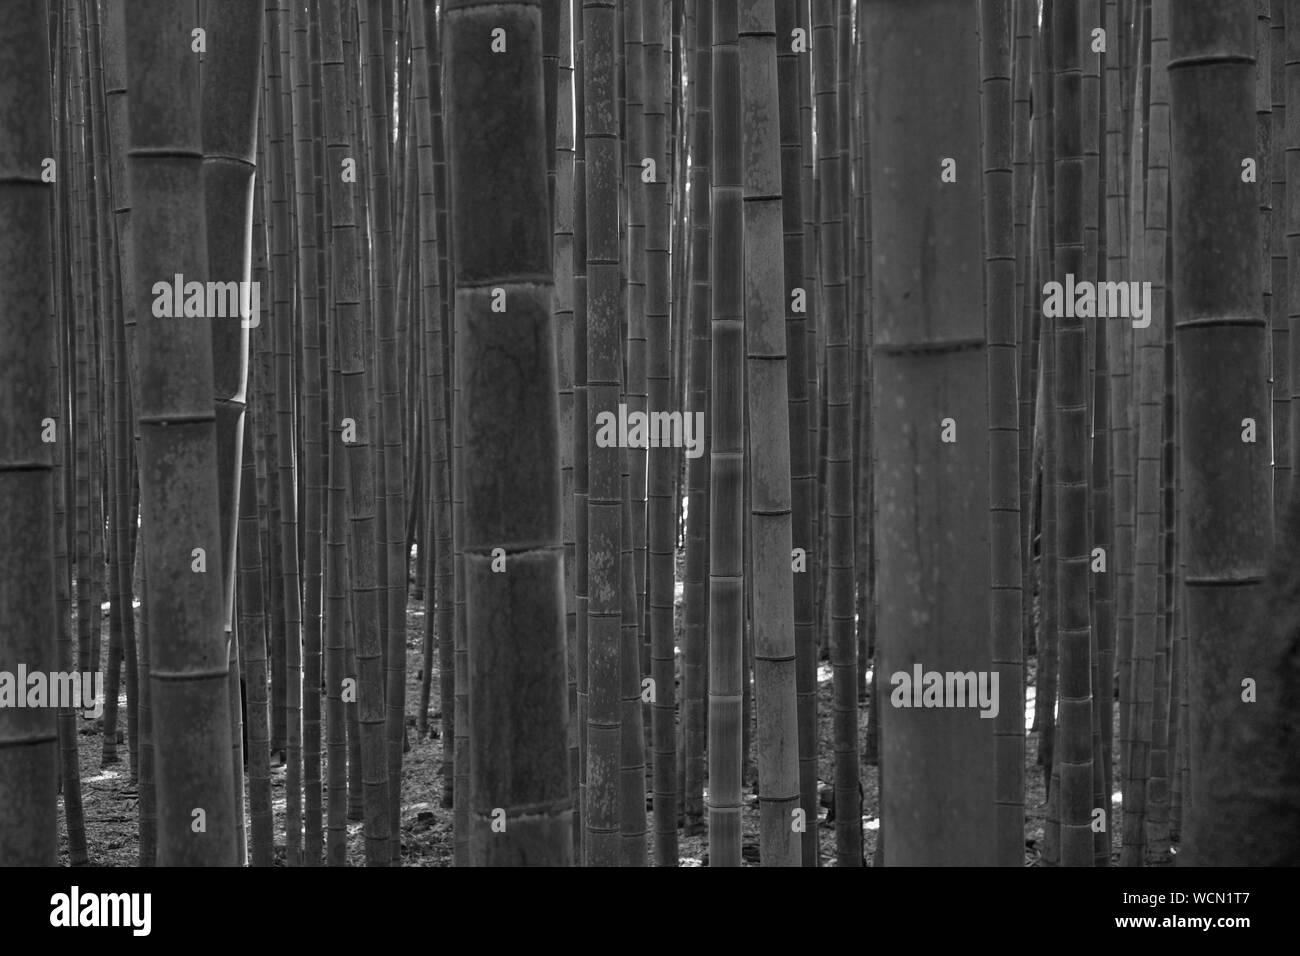 Blurred bamboo in bamboo forest in black and white style Stock Photo